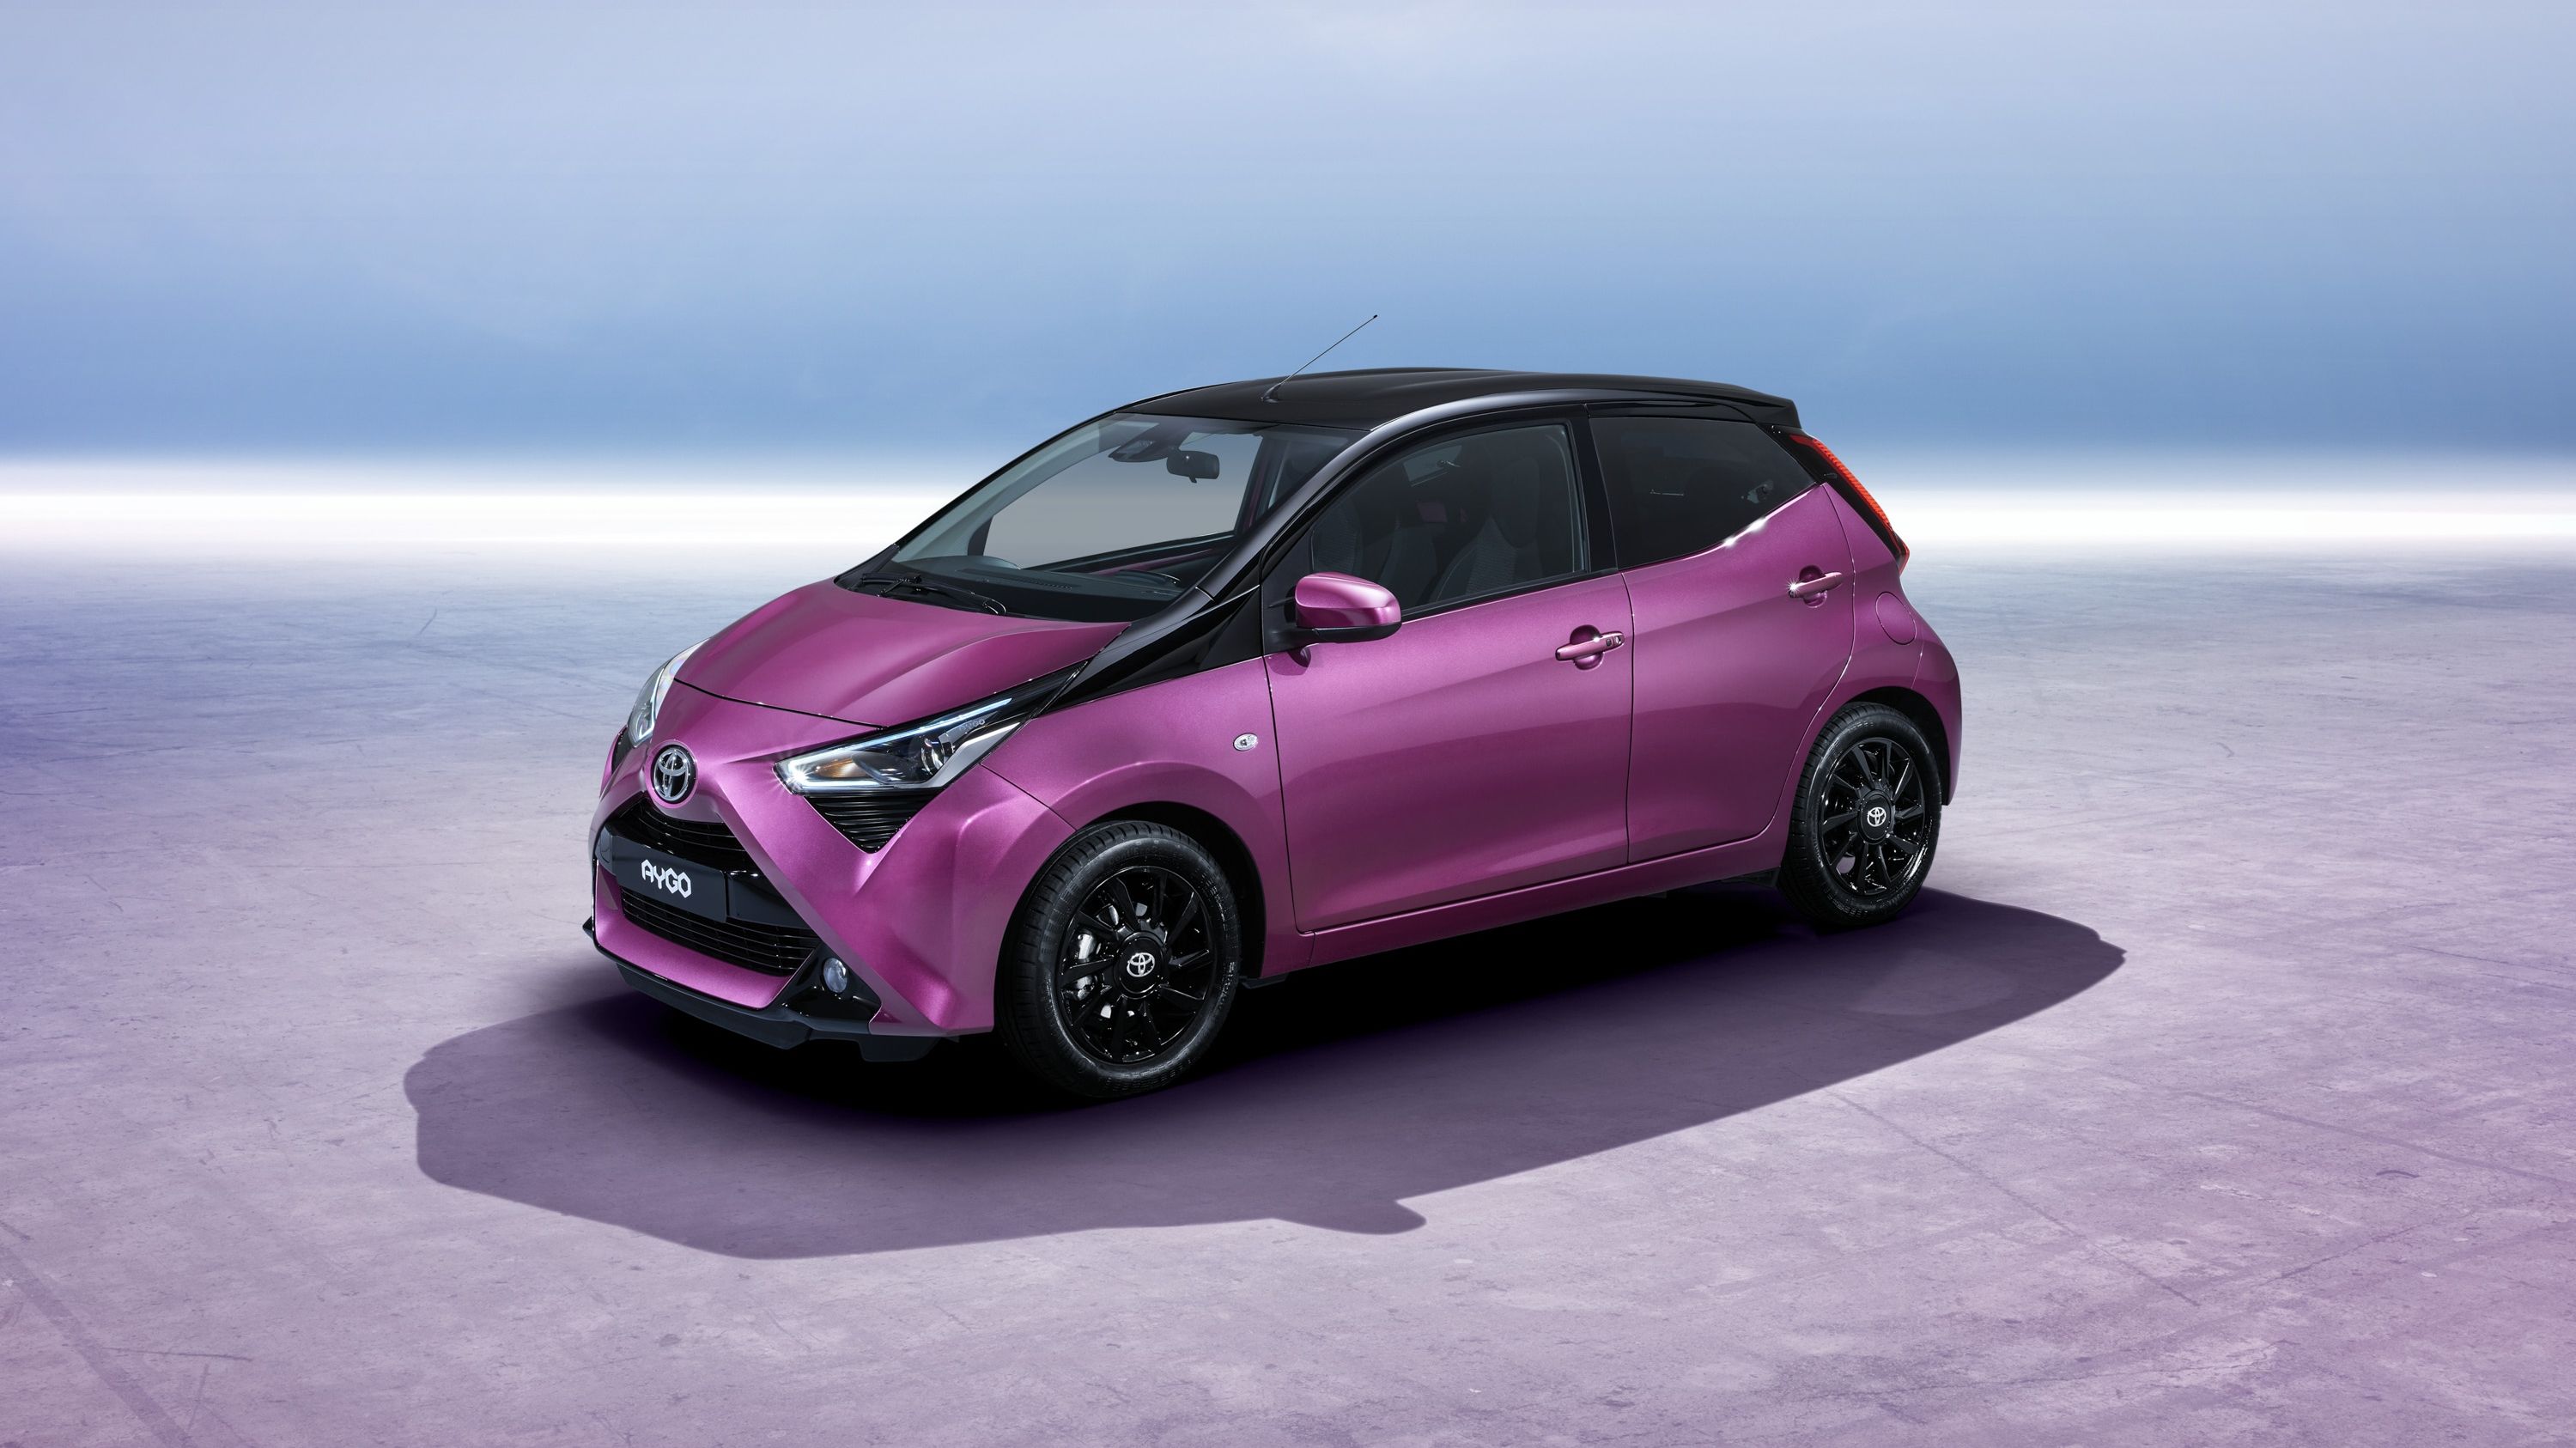 2018 New Toyota Aygo Can Overtake the VW Up! and Hyundai i10 in Europe but Has Little Chance Against Fiat